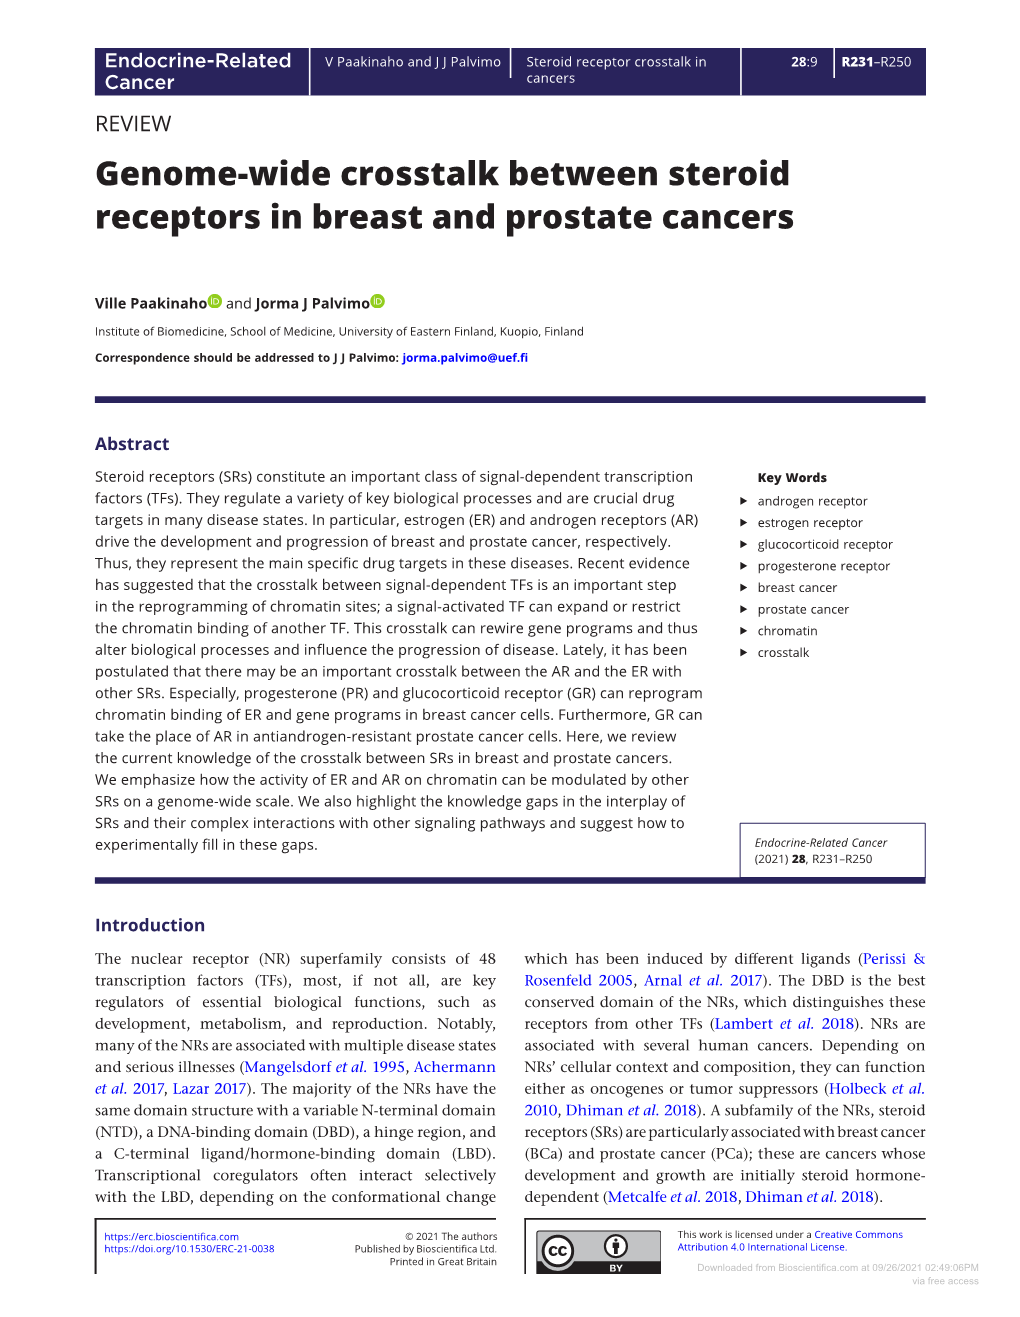 Genome-Wide Crosstalk Between Steroid Receptors in Breast and Prostate Cancers